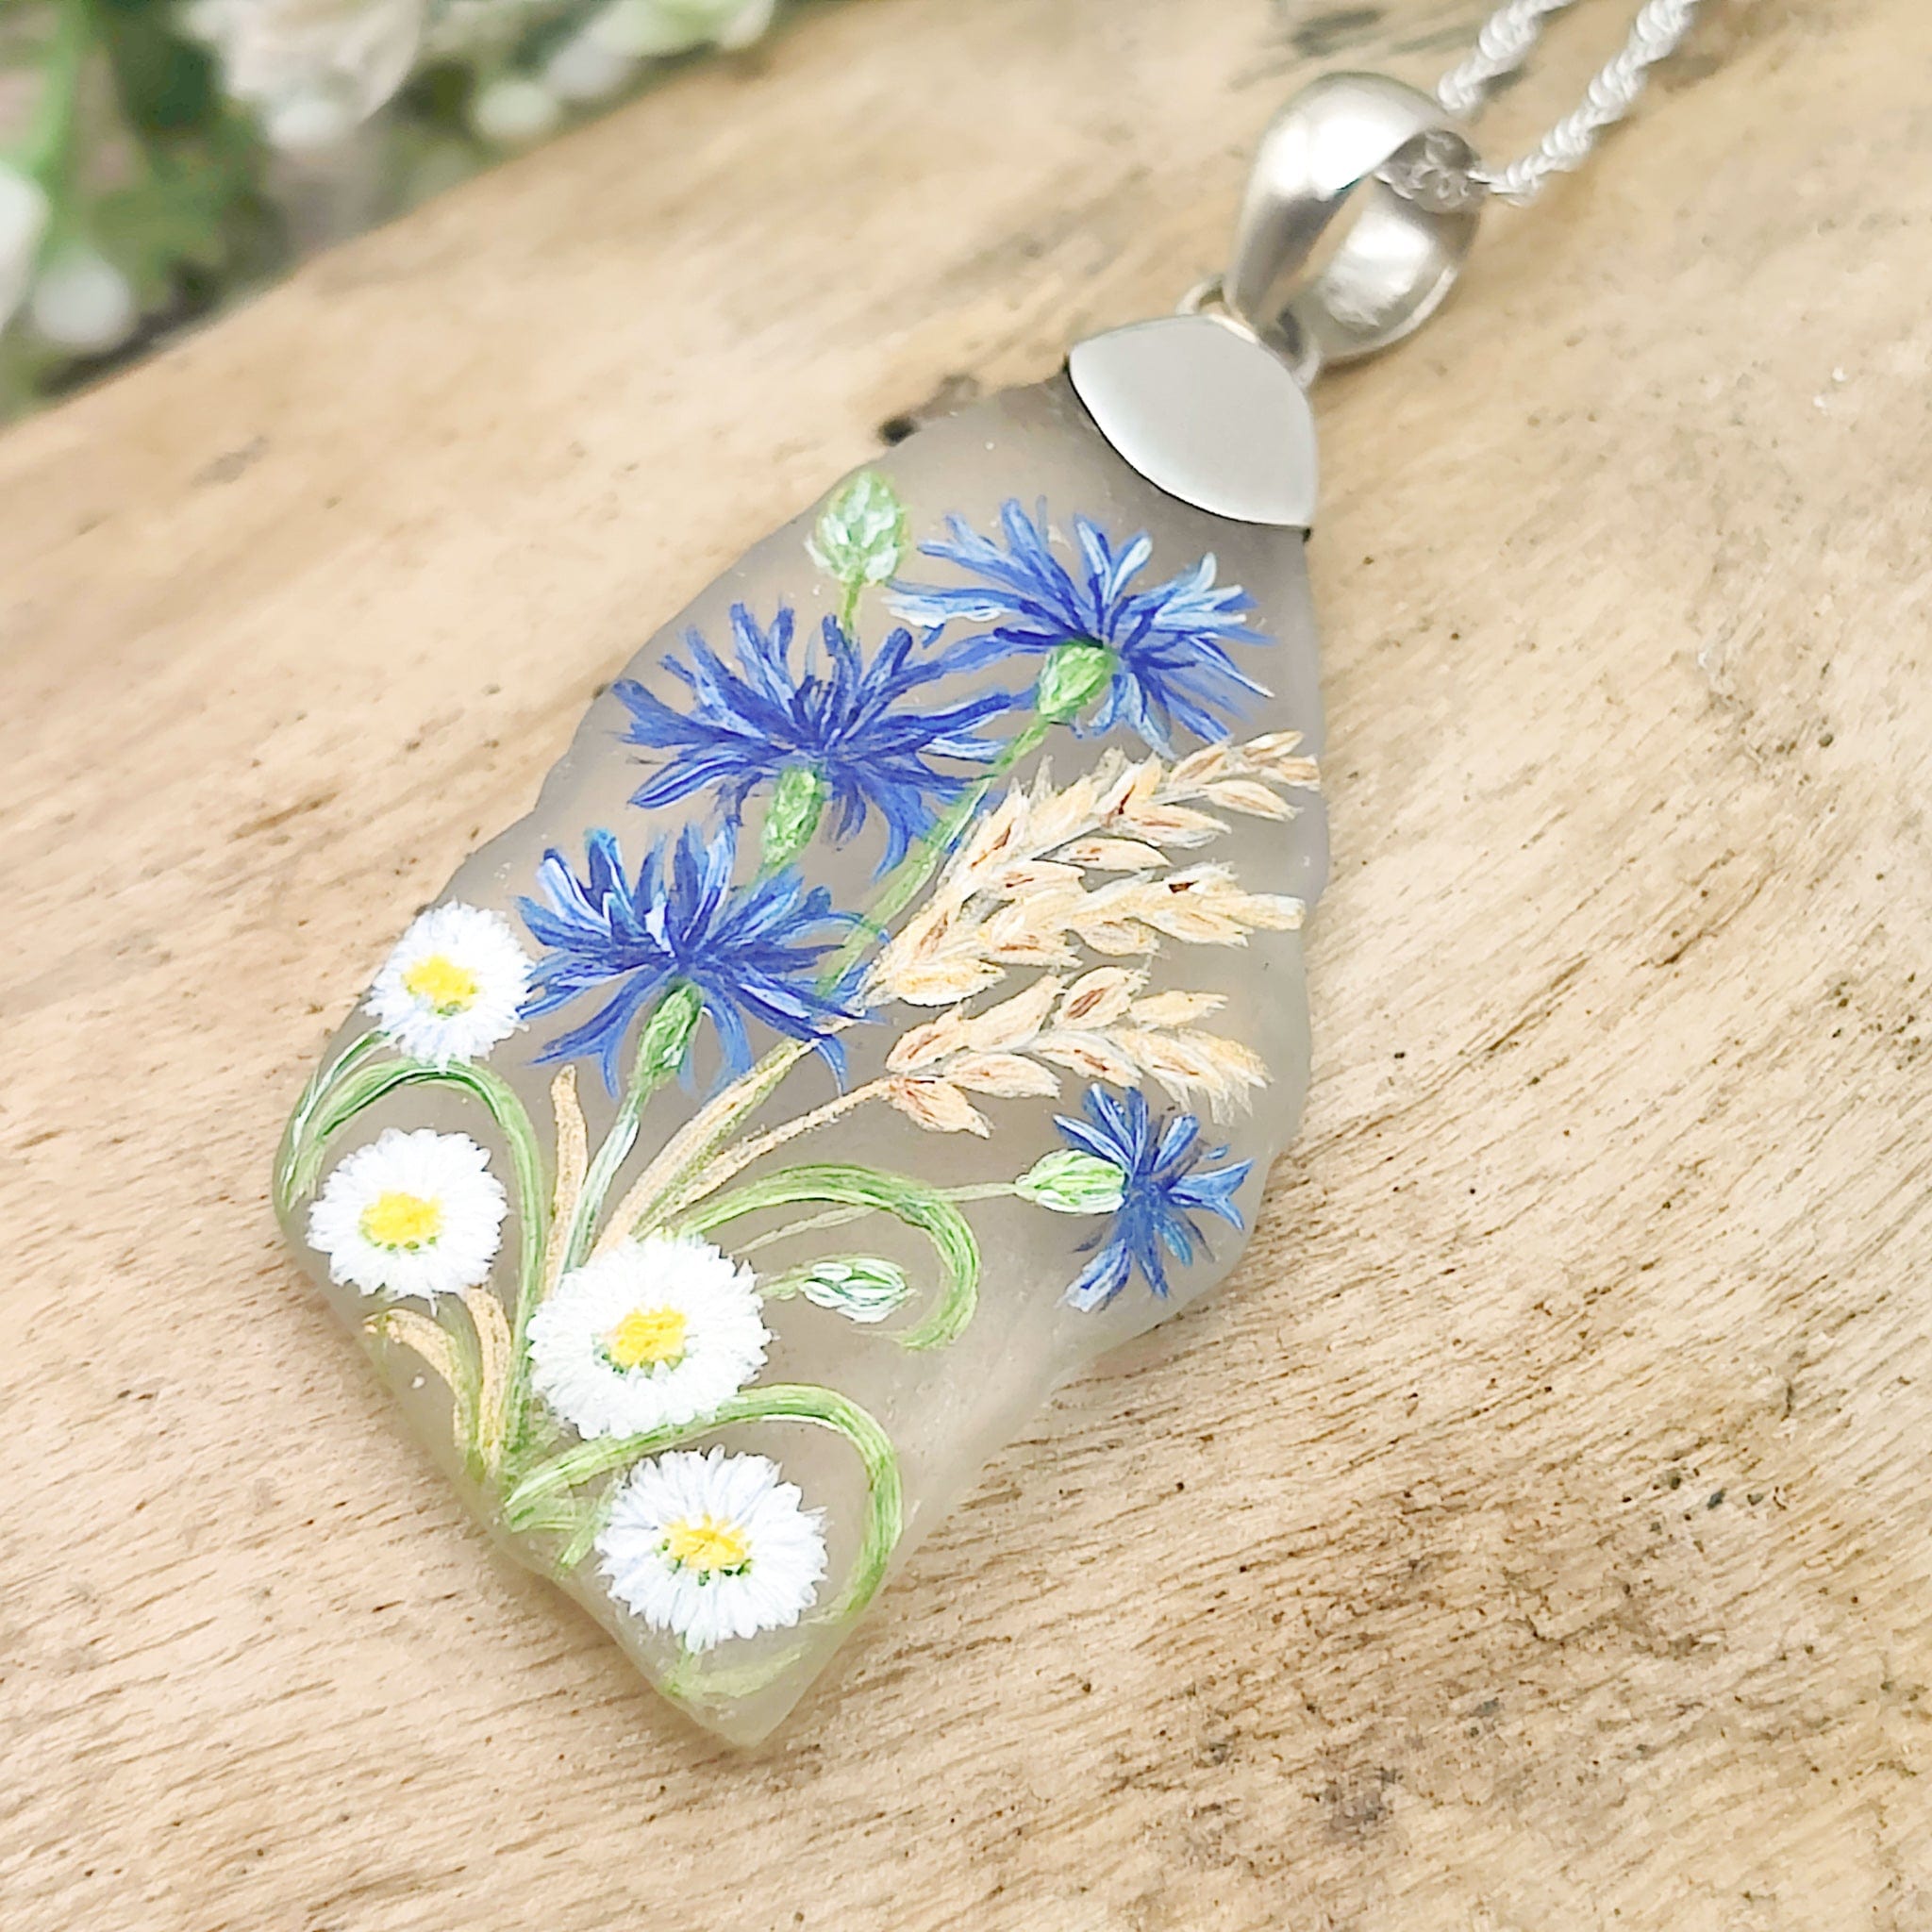 Hepburn and Hughes Hand Painted Sea Glass Pendant | Cornflowers and Daises | Sterling Silver